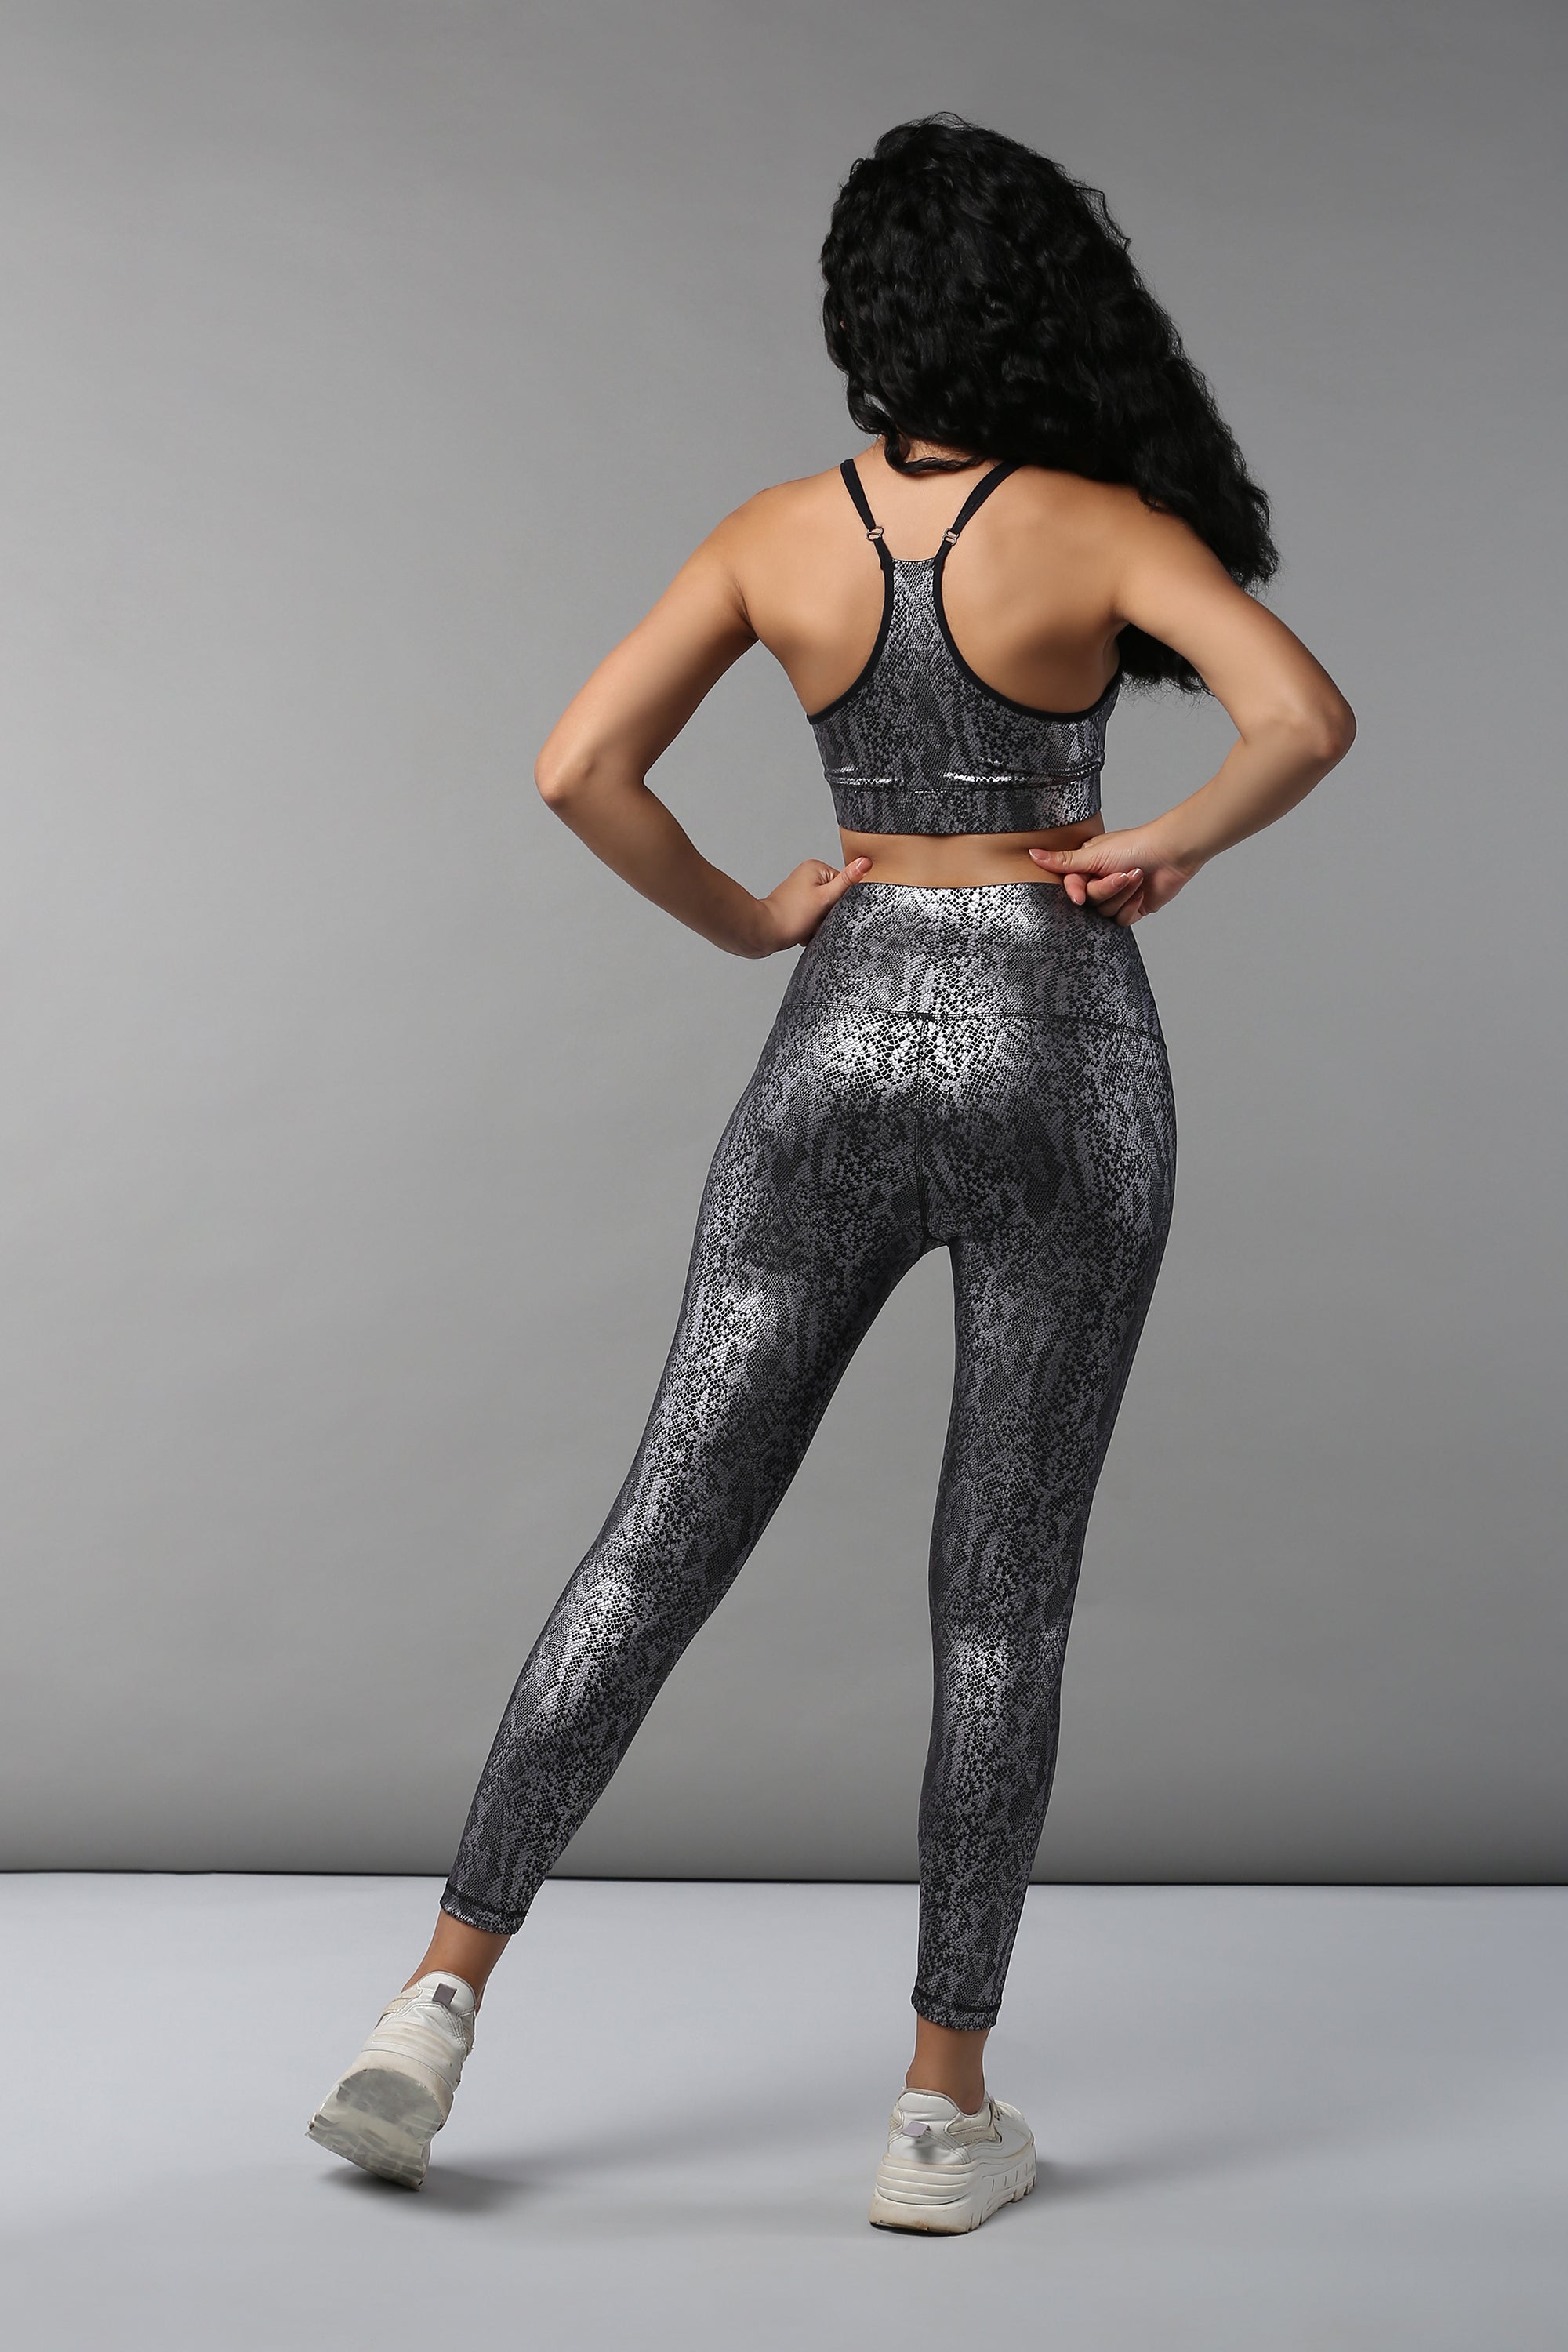 Stay stylish and comfortable with these shimmer leggings